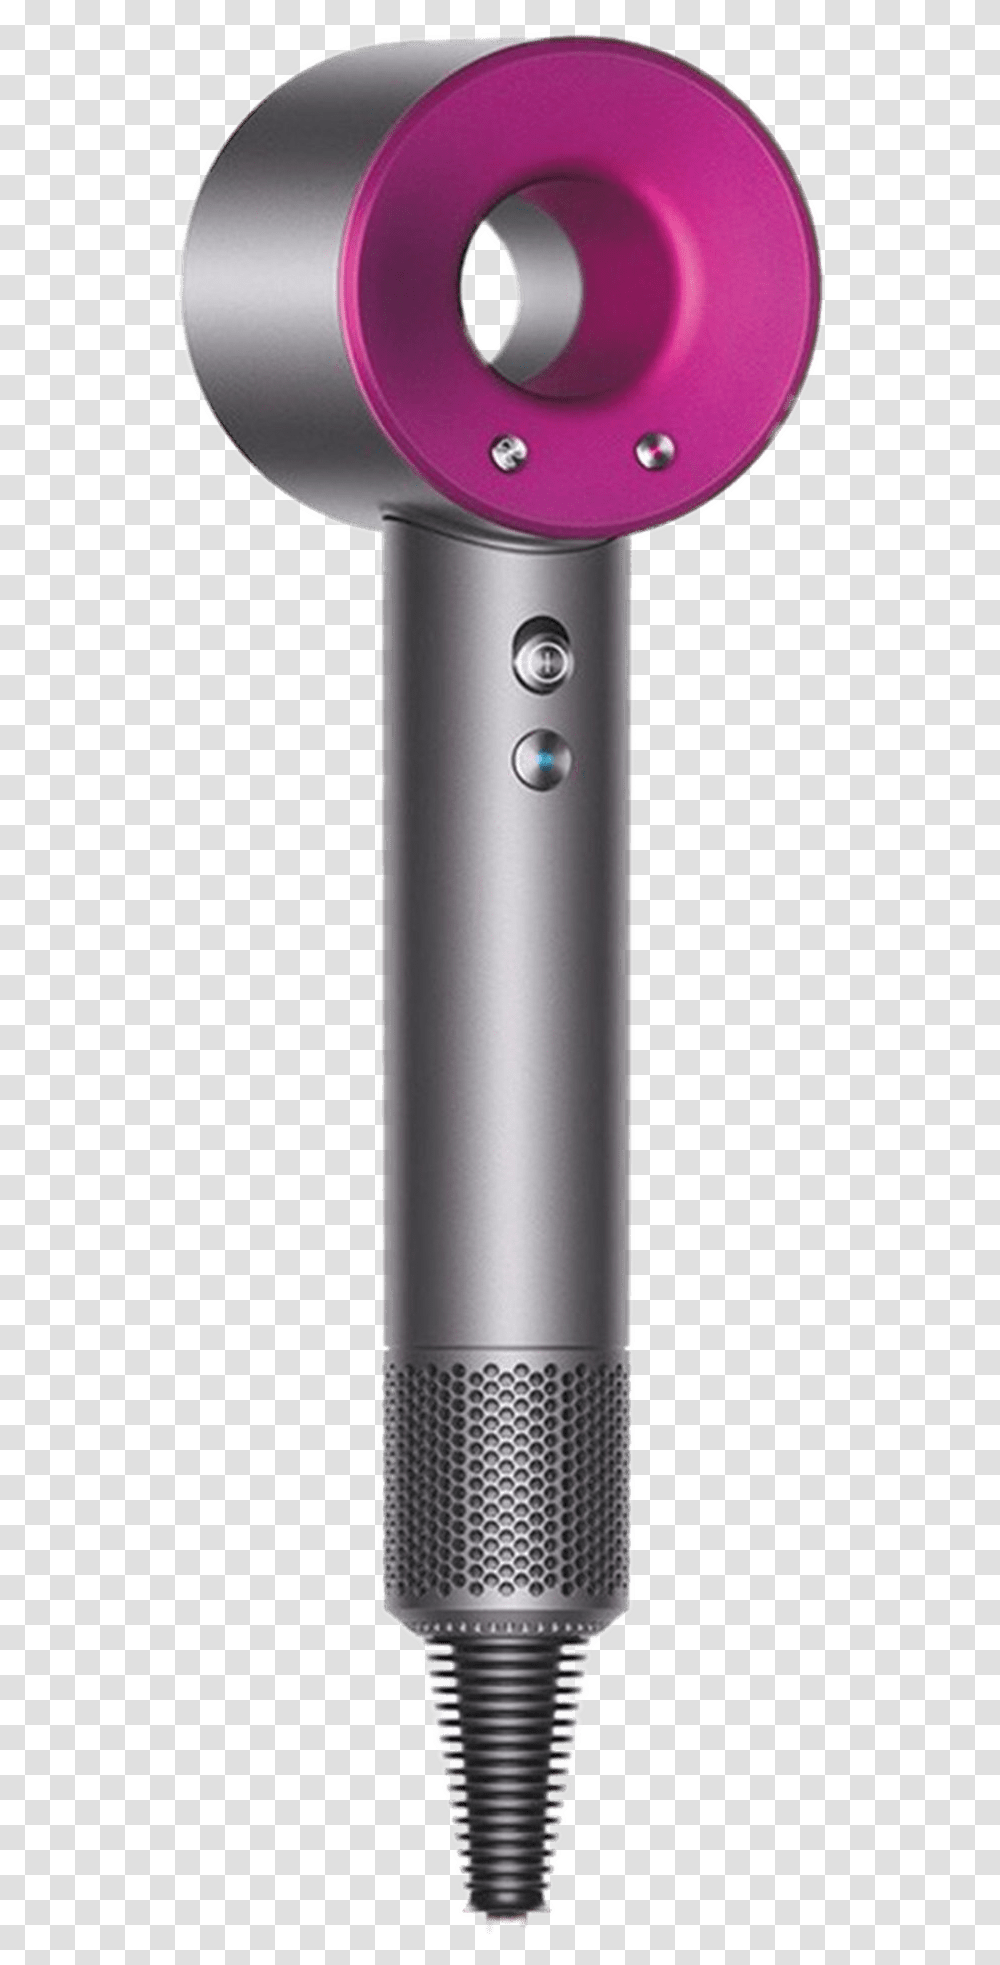 Dyson Supersonic Hairdryer Dyson Hair Dryer Supersonic, Electrical Device, Blow Dryer, Appliance, Hair Drier Transparent Png